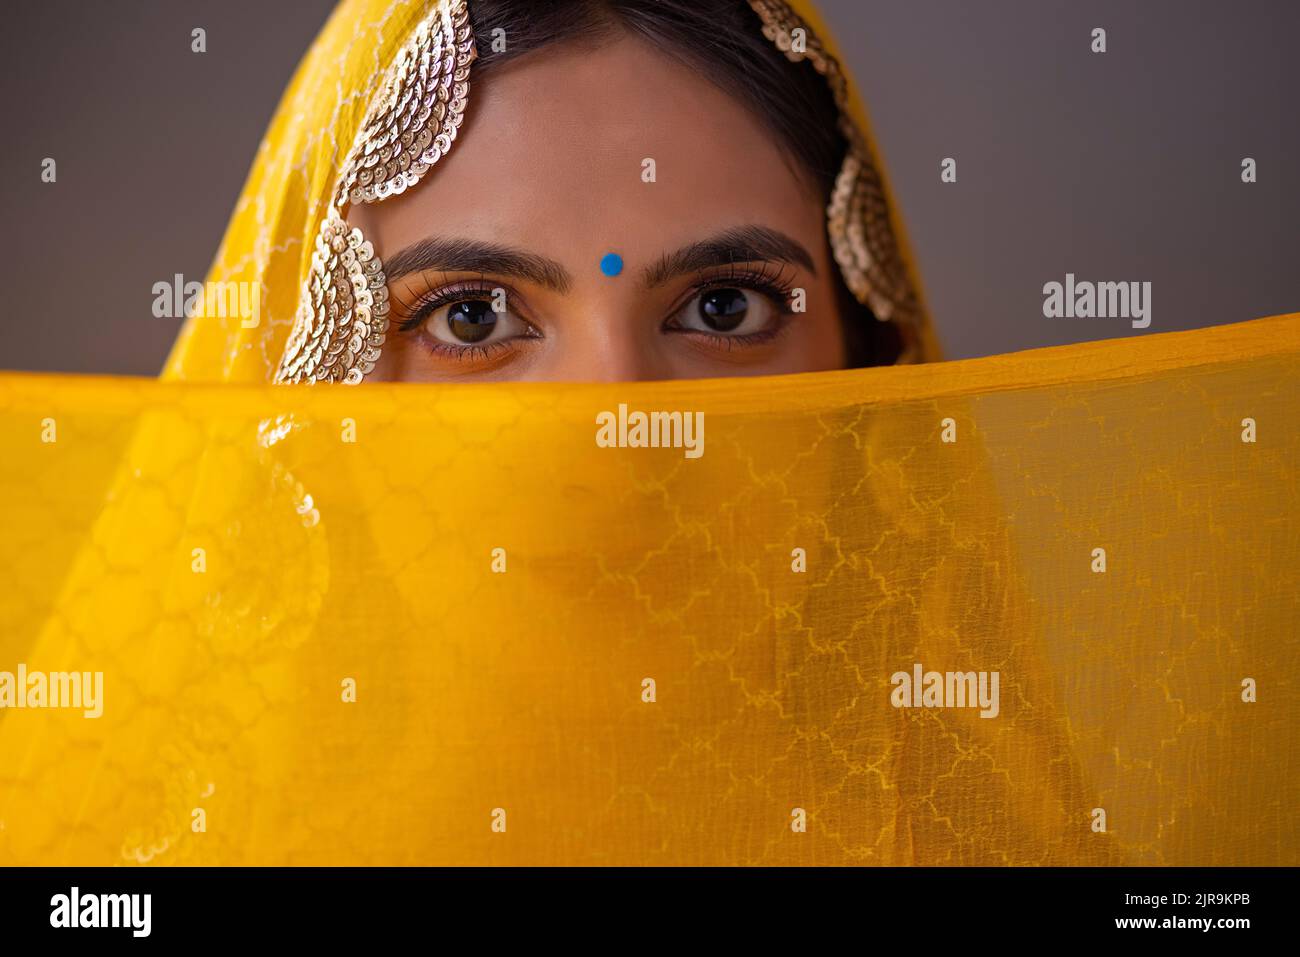 Portrait of an Indian woman in yellow veil Stock Photo